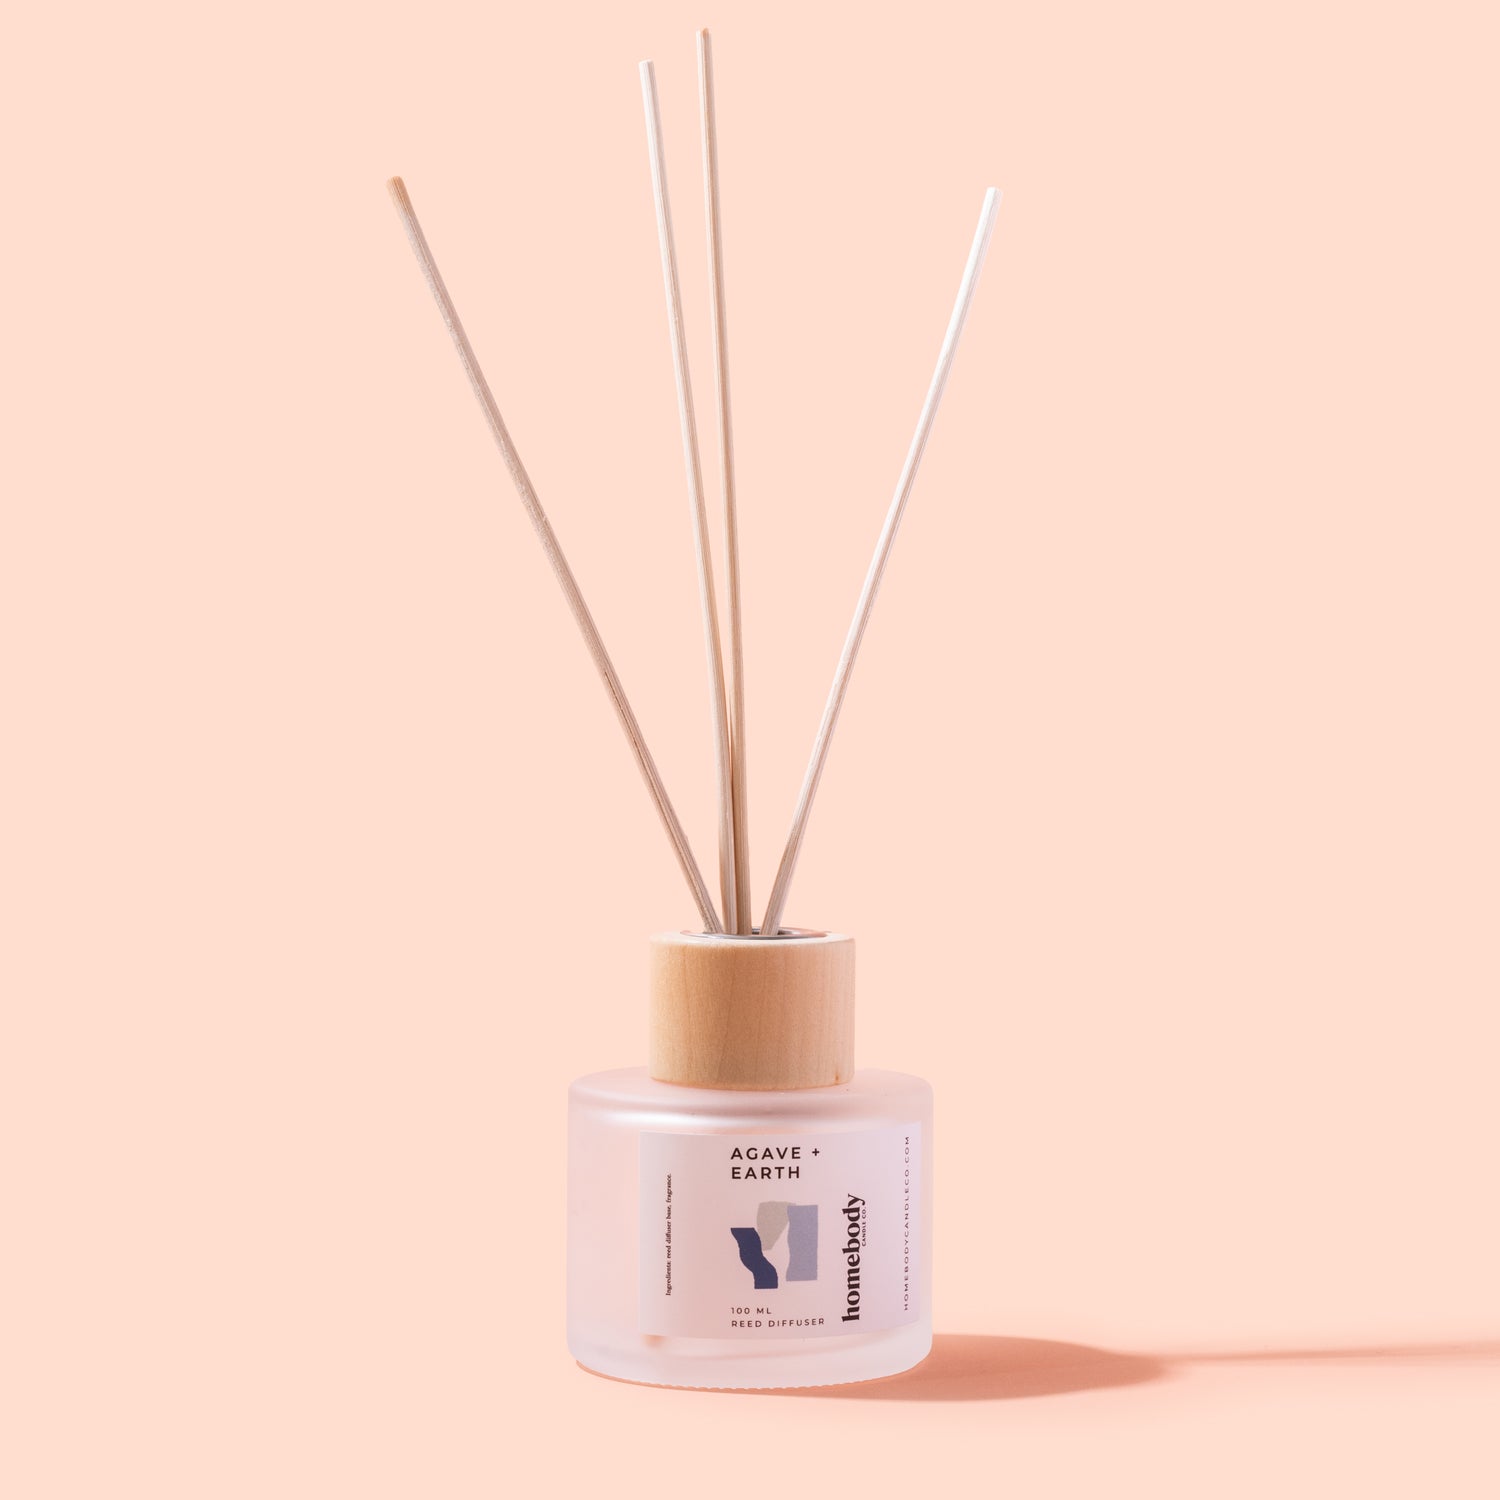 Agave + Earth Diffuser Homebody Candle Co